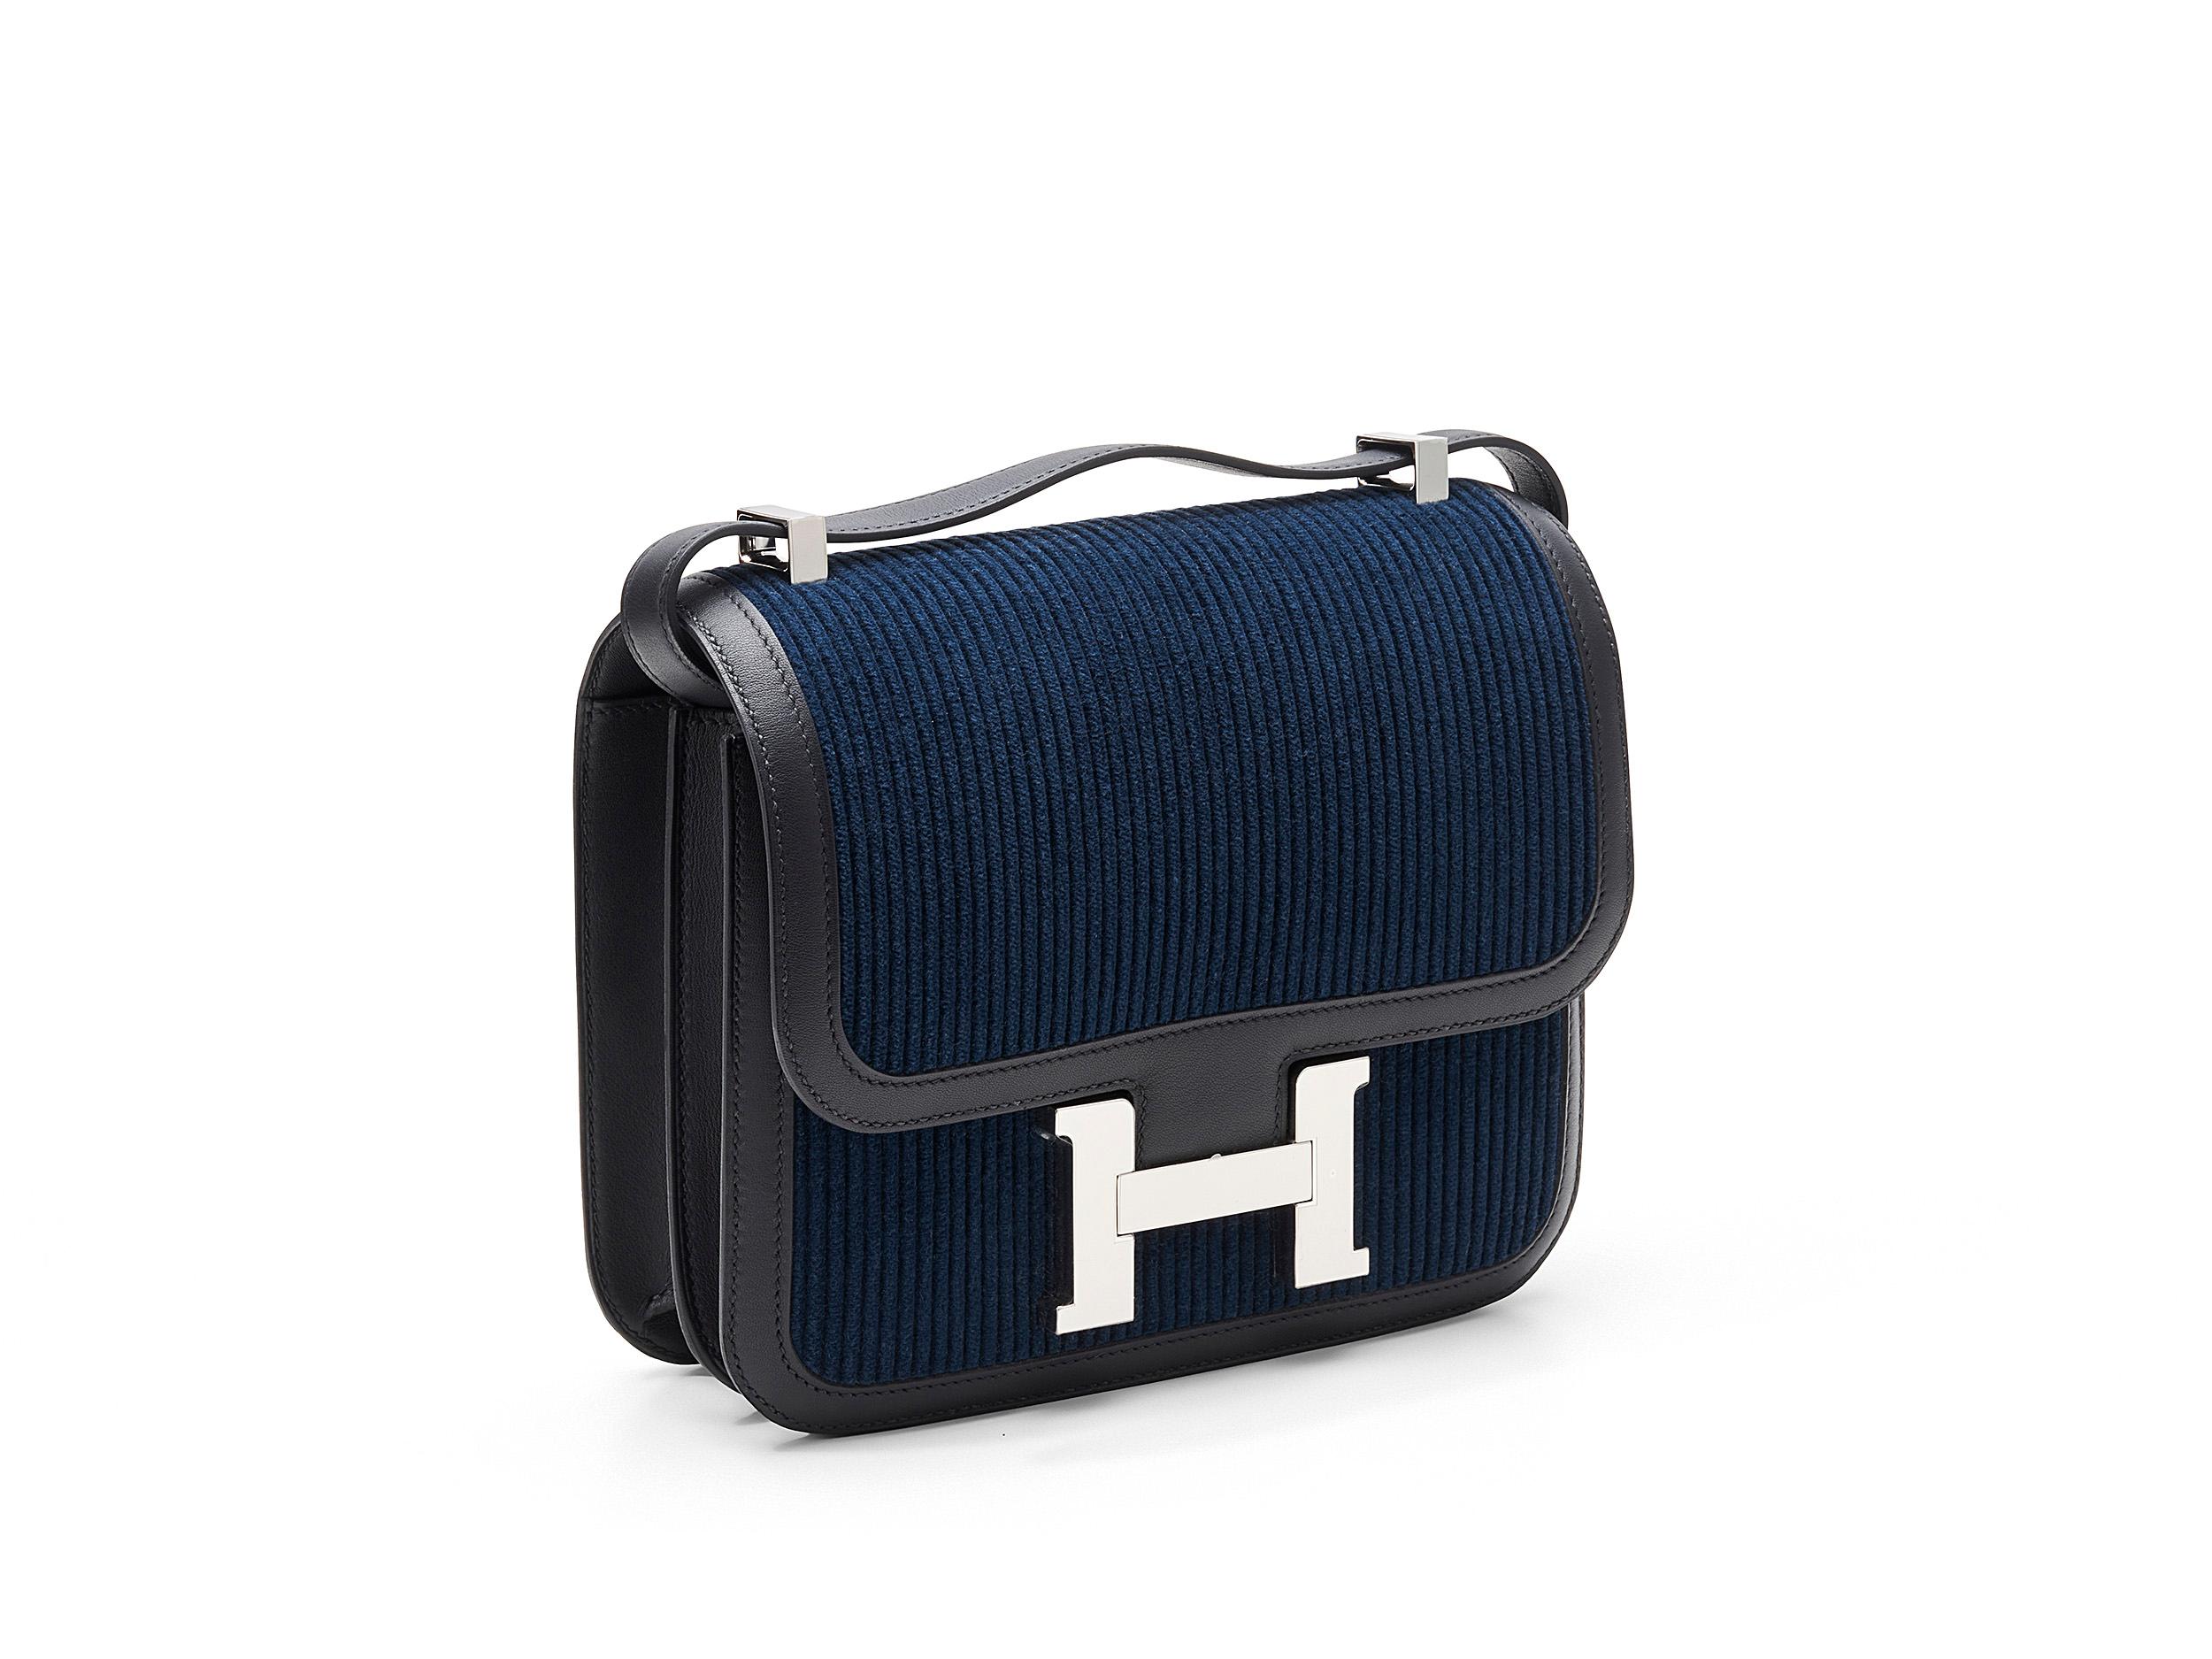 Hermès Constance 24 in bleu marine and corduroy with palladium hardware. This bag is a limited edition, unworn and comes as full set including the original receipt.
Stamp Y (2020) 

